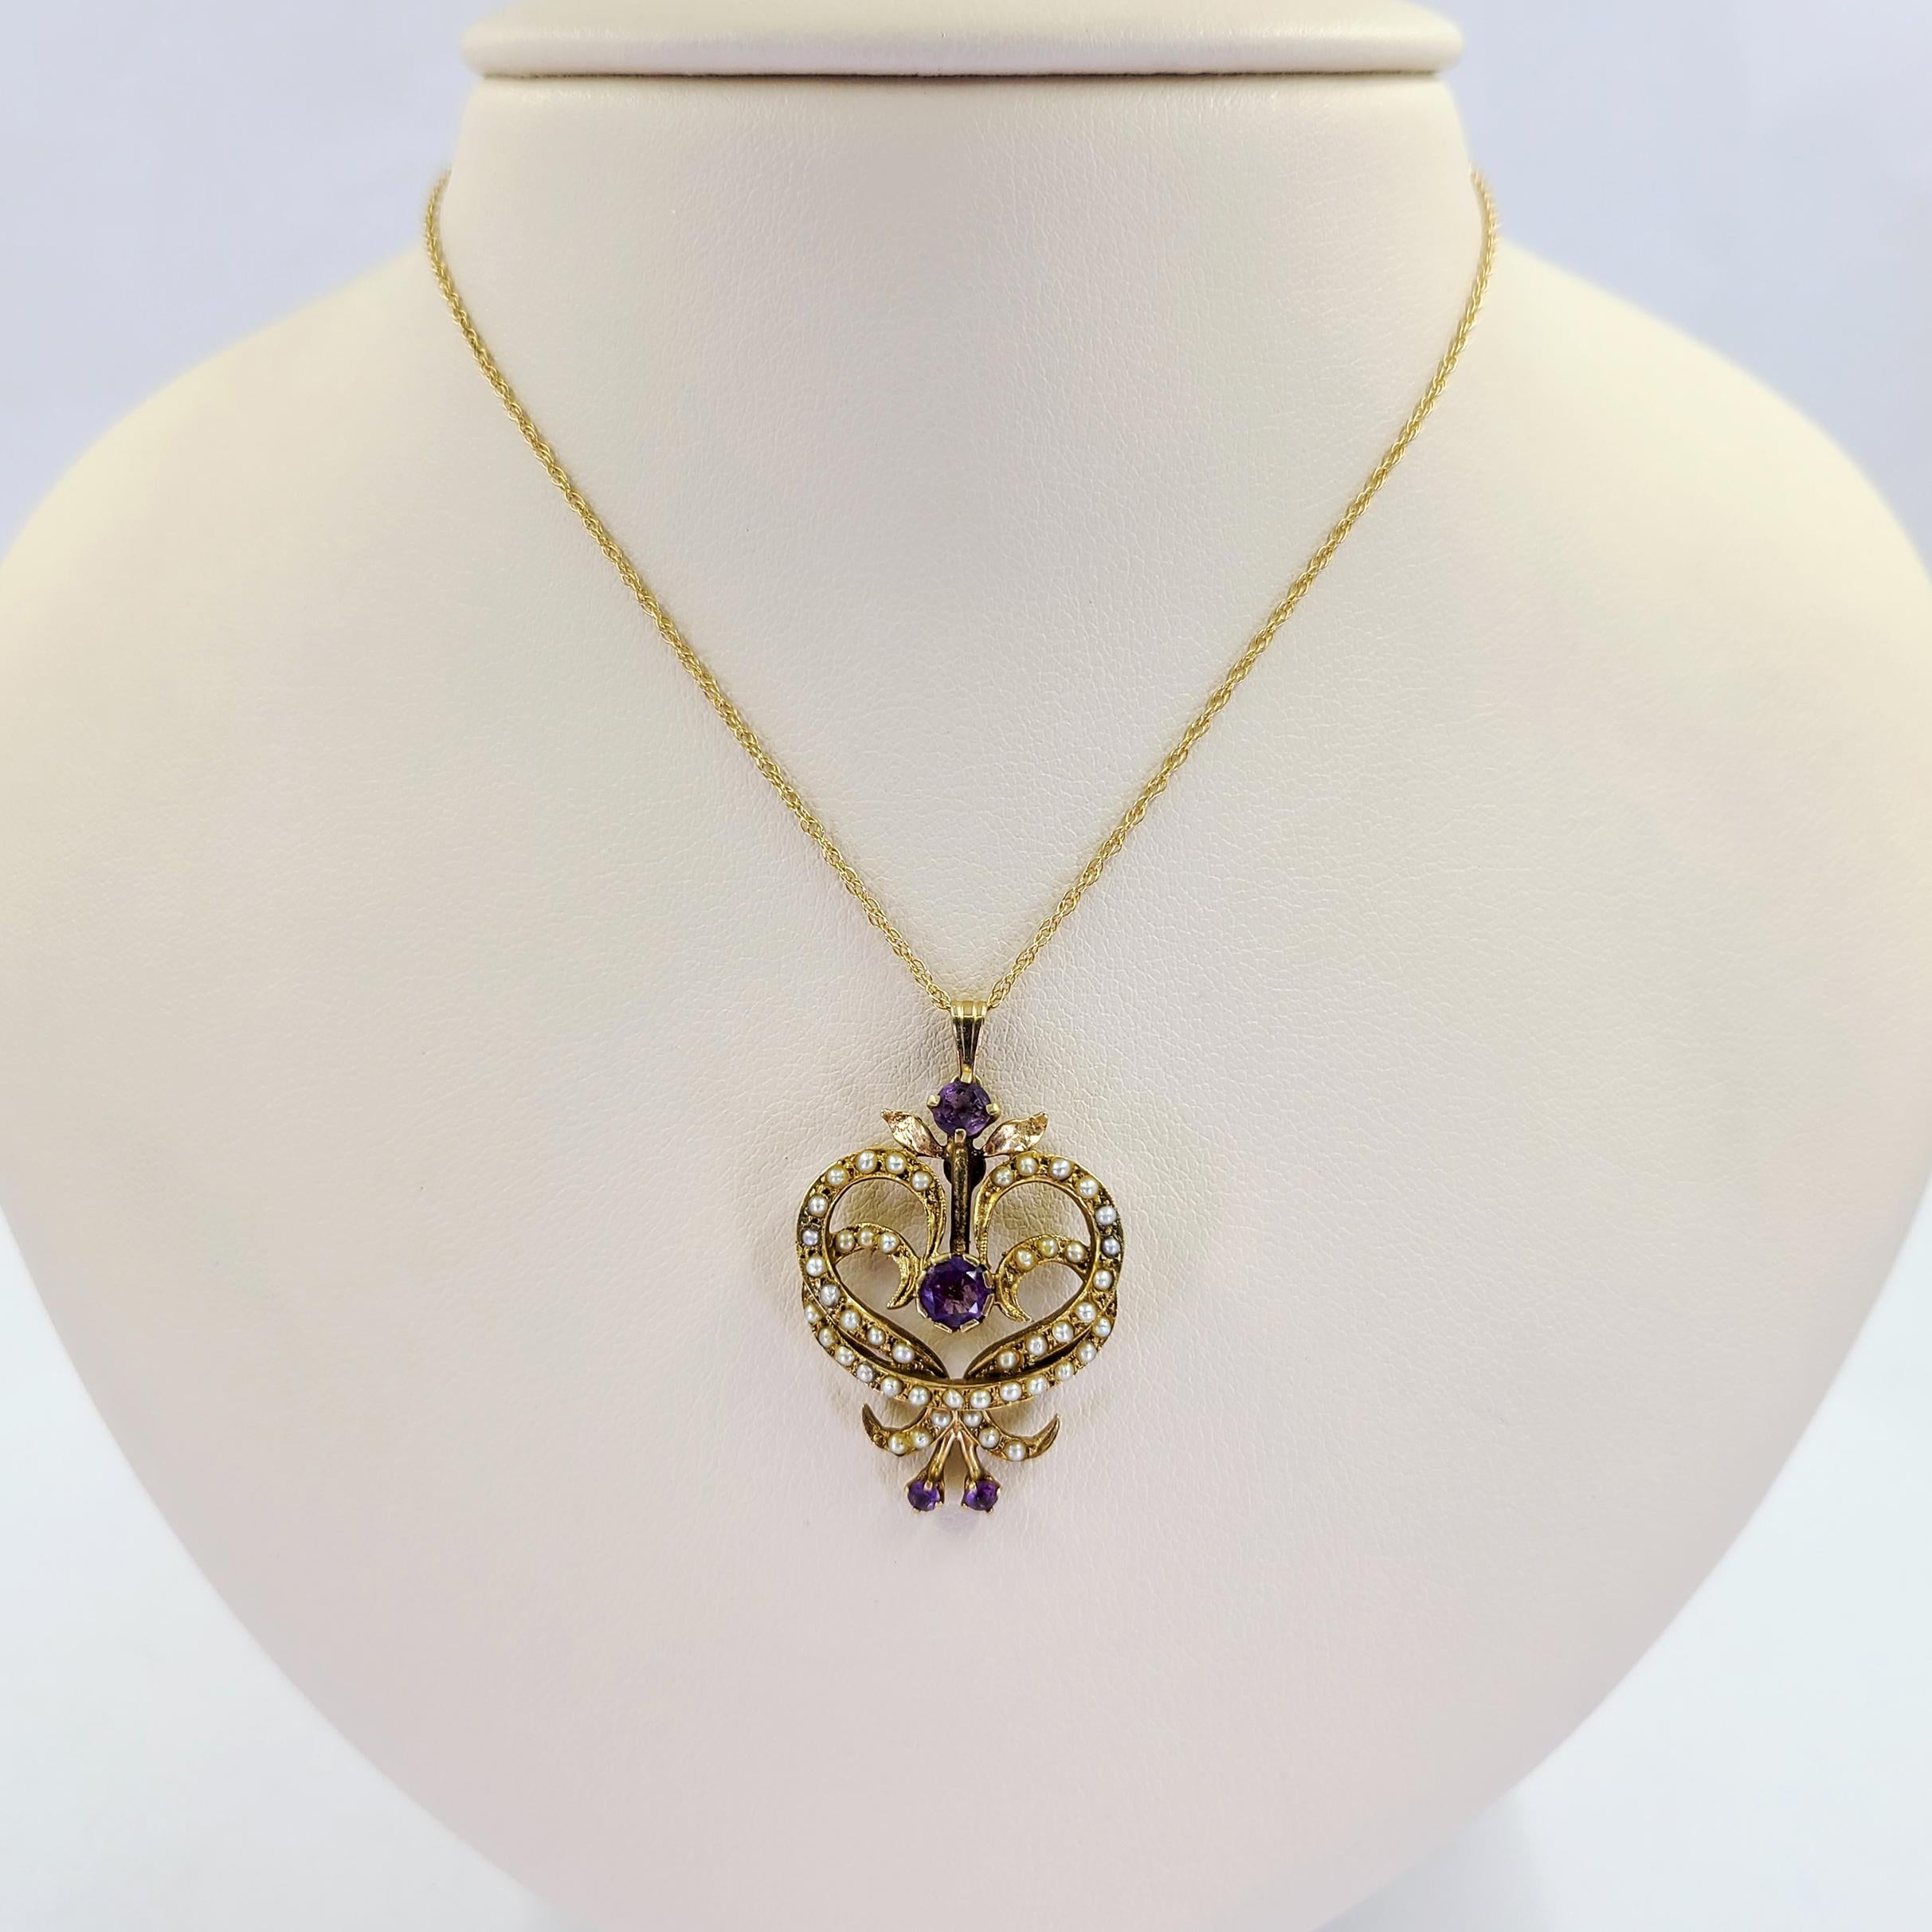 Art Nouveau Pearl and Amethyst Pendant Necklace In Good Condition For Sale In Coral Gables, FL